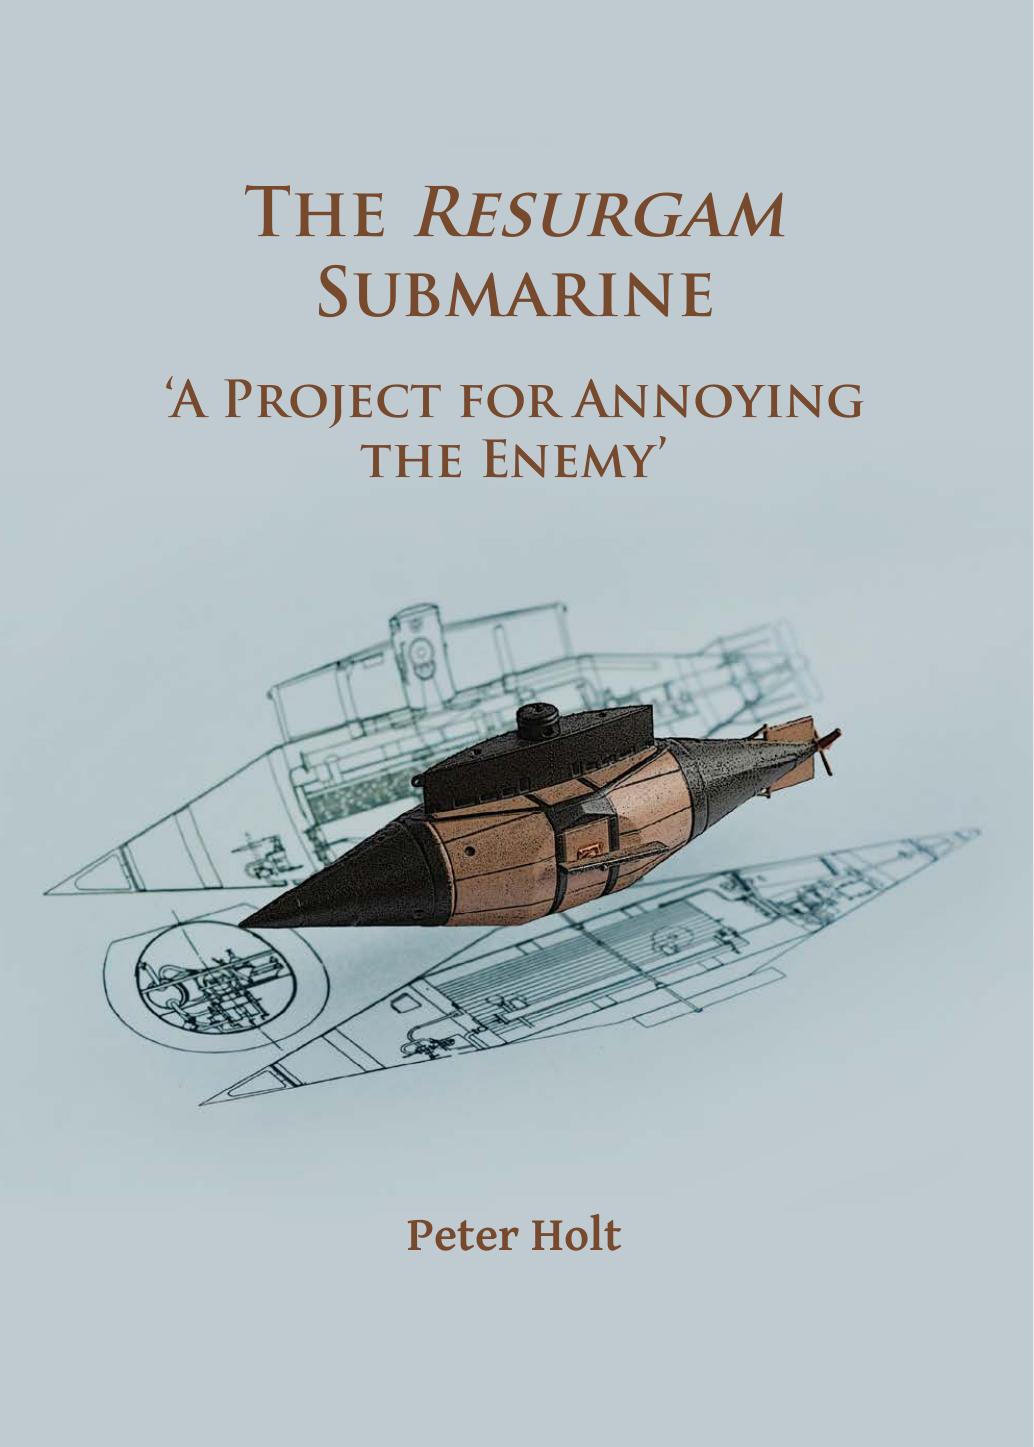 The Resurgam Submarine : 'a Project for Annoying the Enemy' by Peter Holt